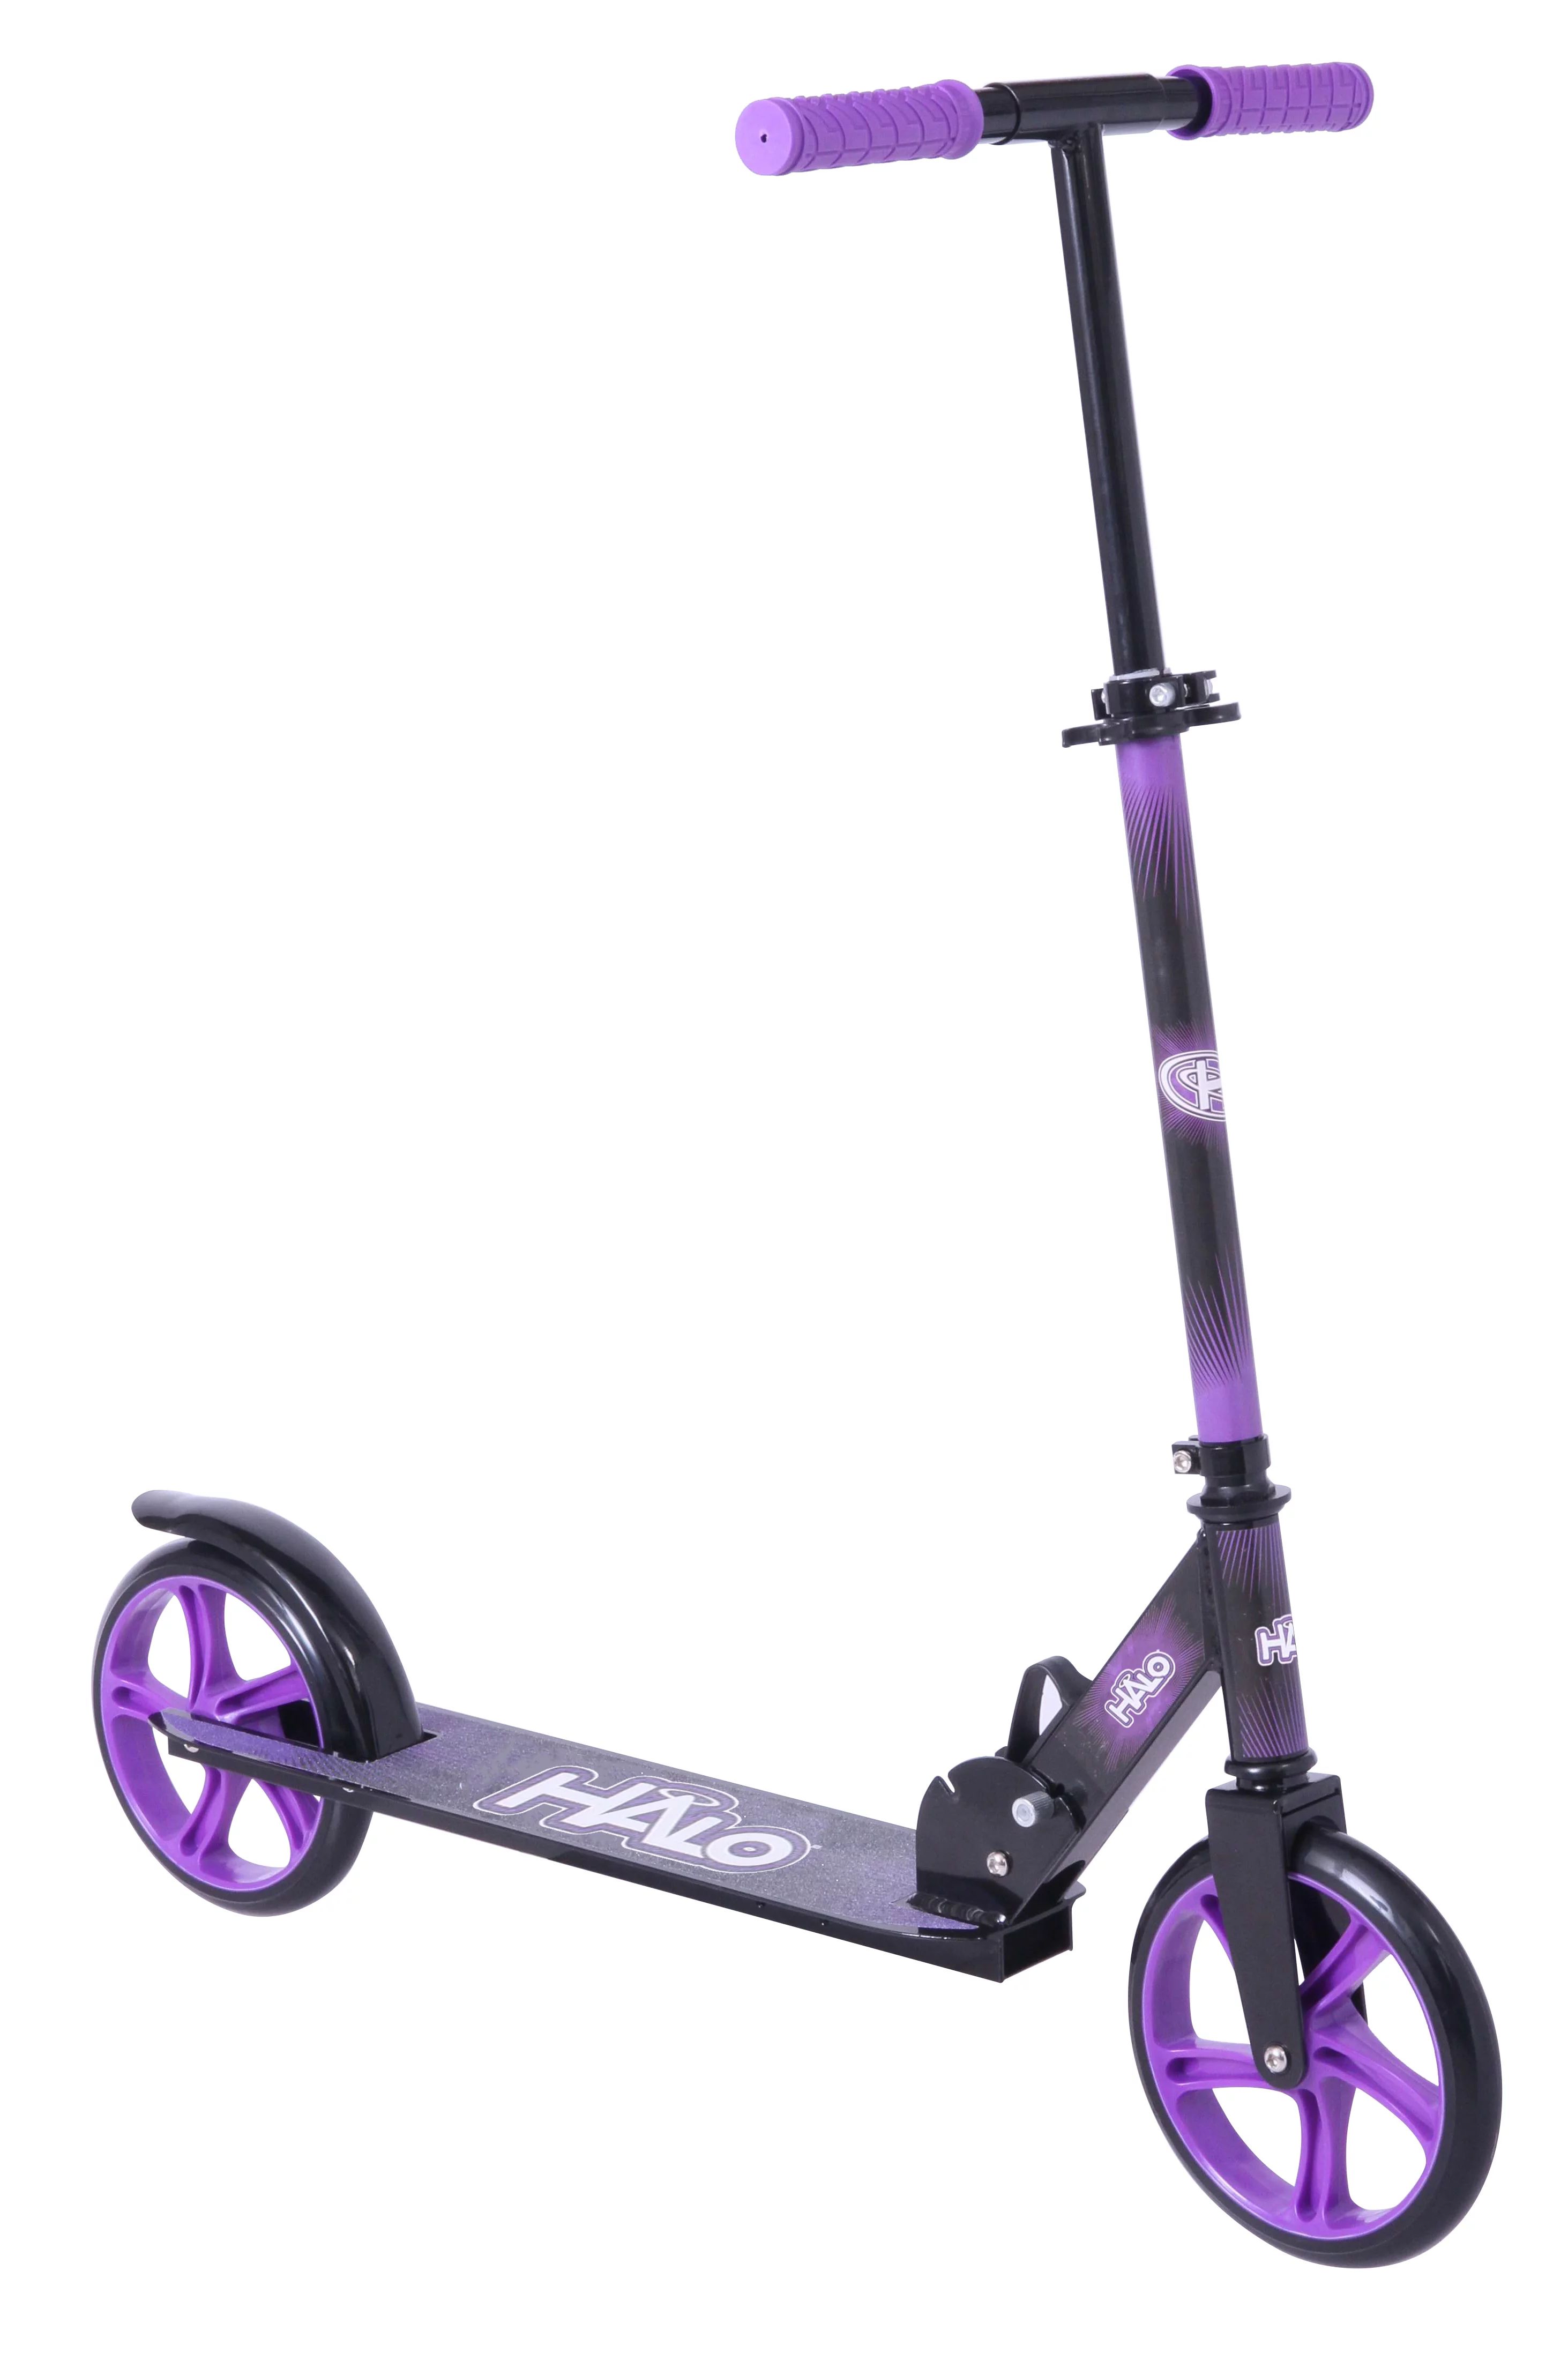 HALO Rise Above Supreme Big Wheel Scooter - Purple - Designed For All Riders (Unisex) - 200mm Whe... | Walmart (US)